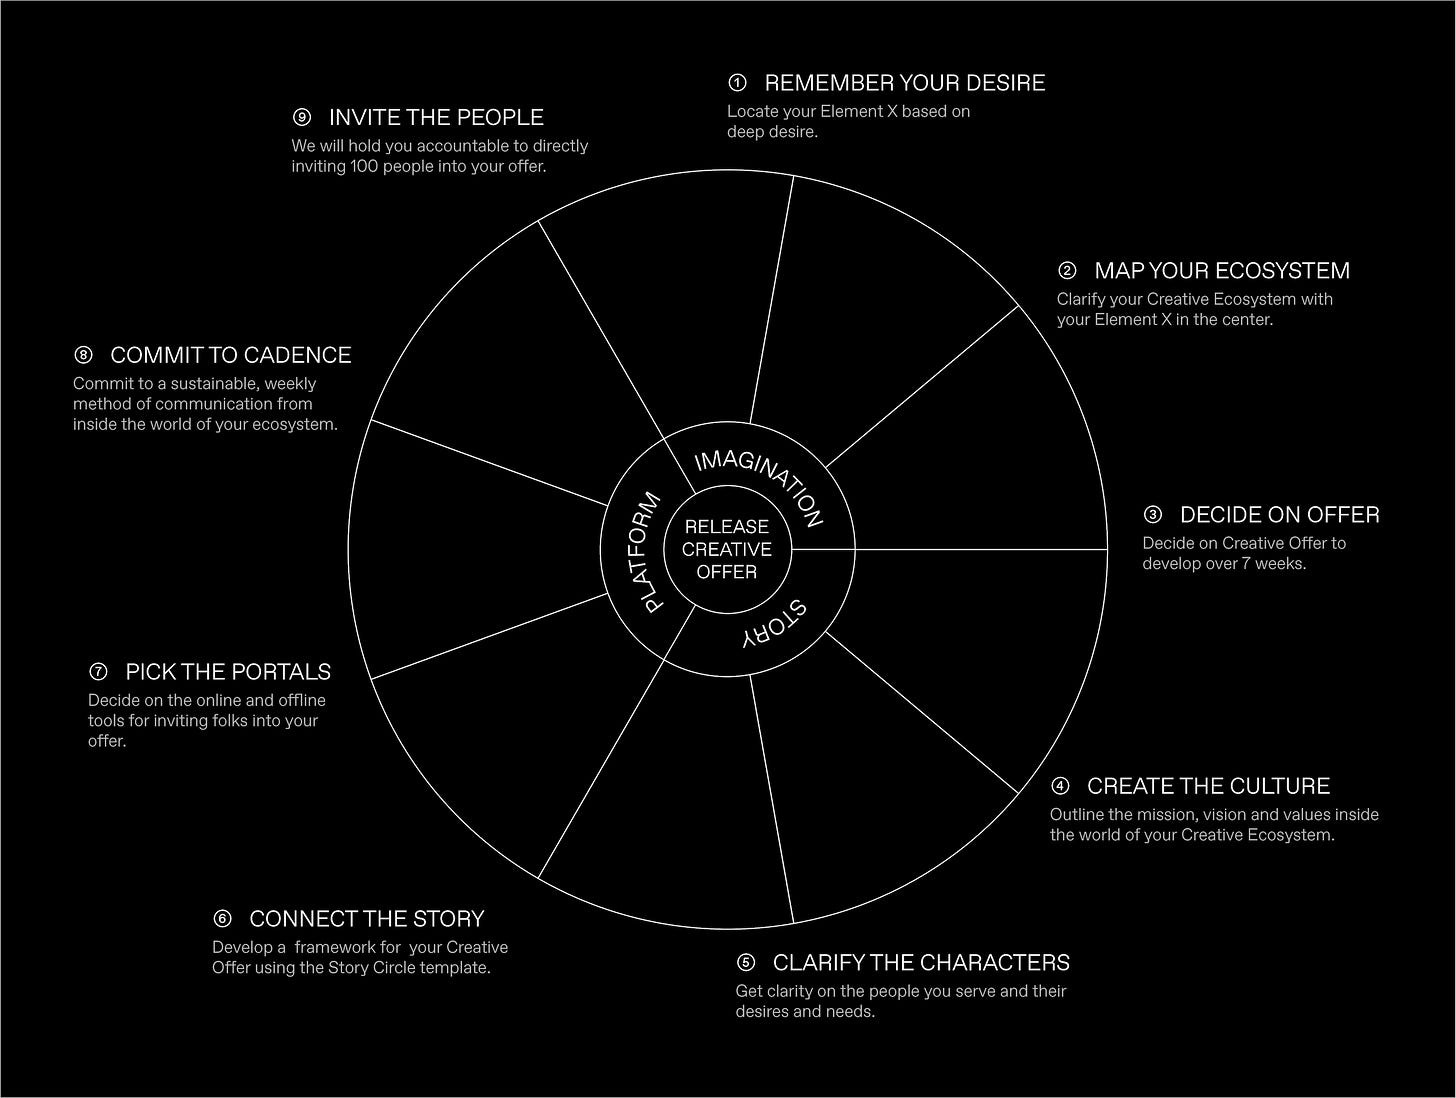 A 9-spoke white story circle on a black background outlining the 9 worldbuilding steps detailed in the Seeda Syllabus. The 3 worldbuilding tools: “Imagination”, “Story” and “Platform” are featured in the middle circling the desired outcome which is releasing a creative offer.